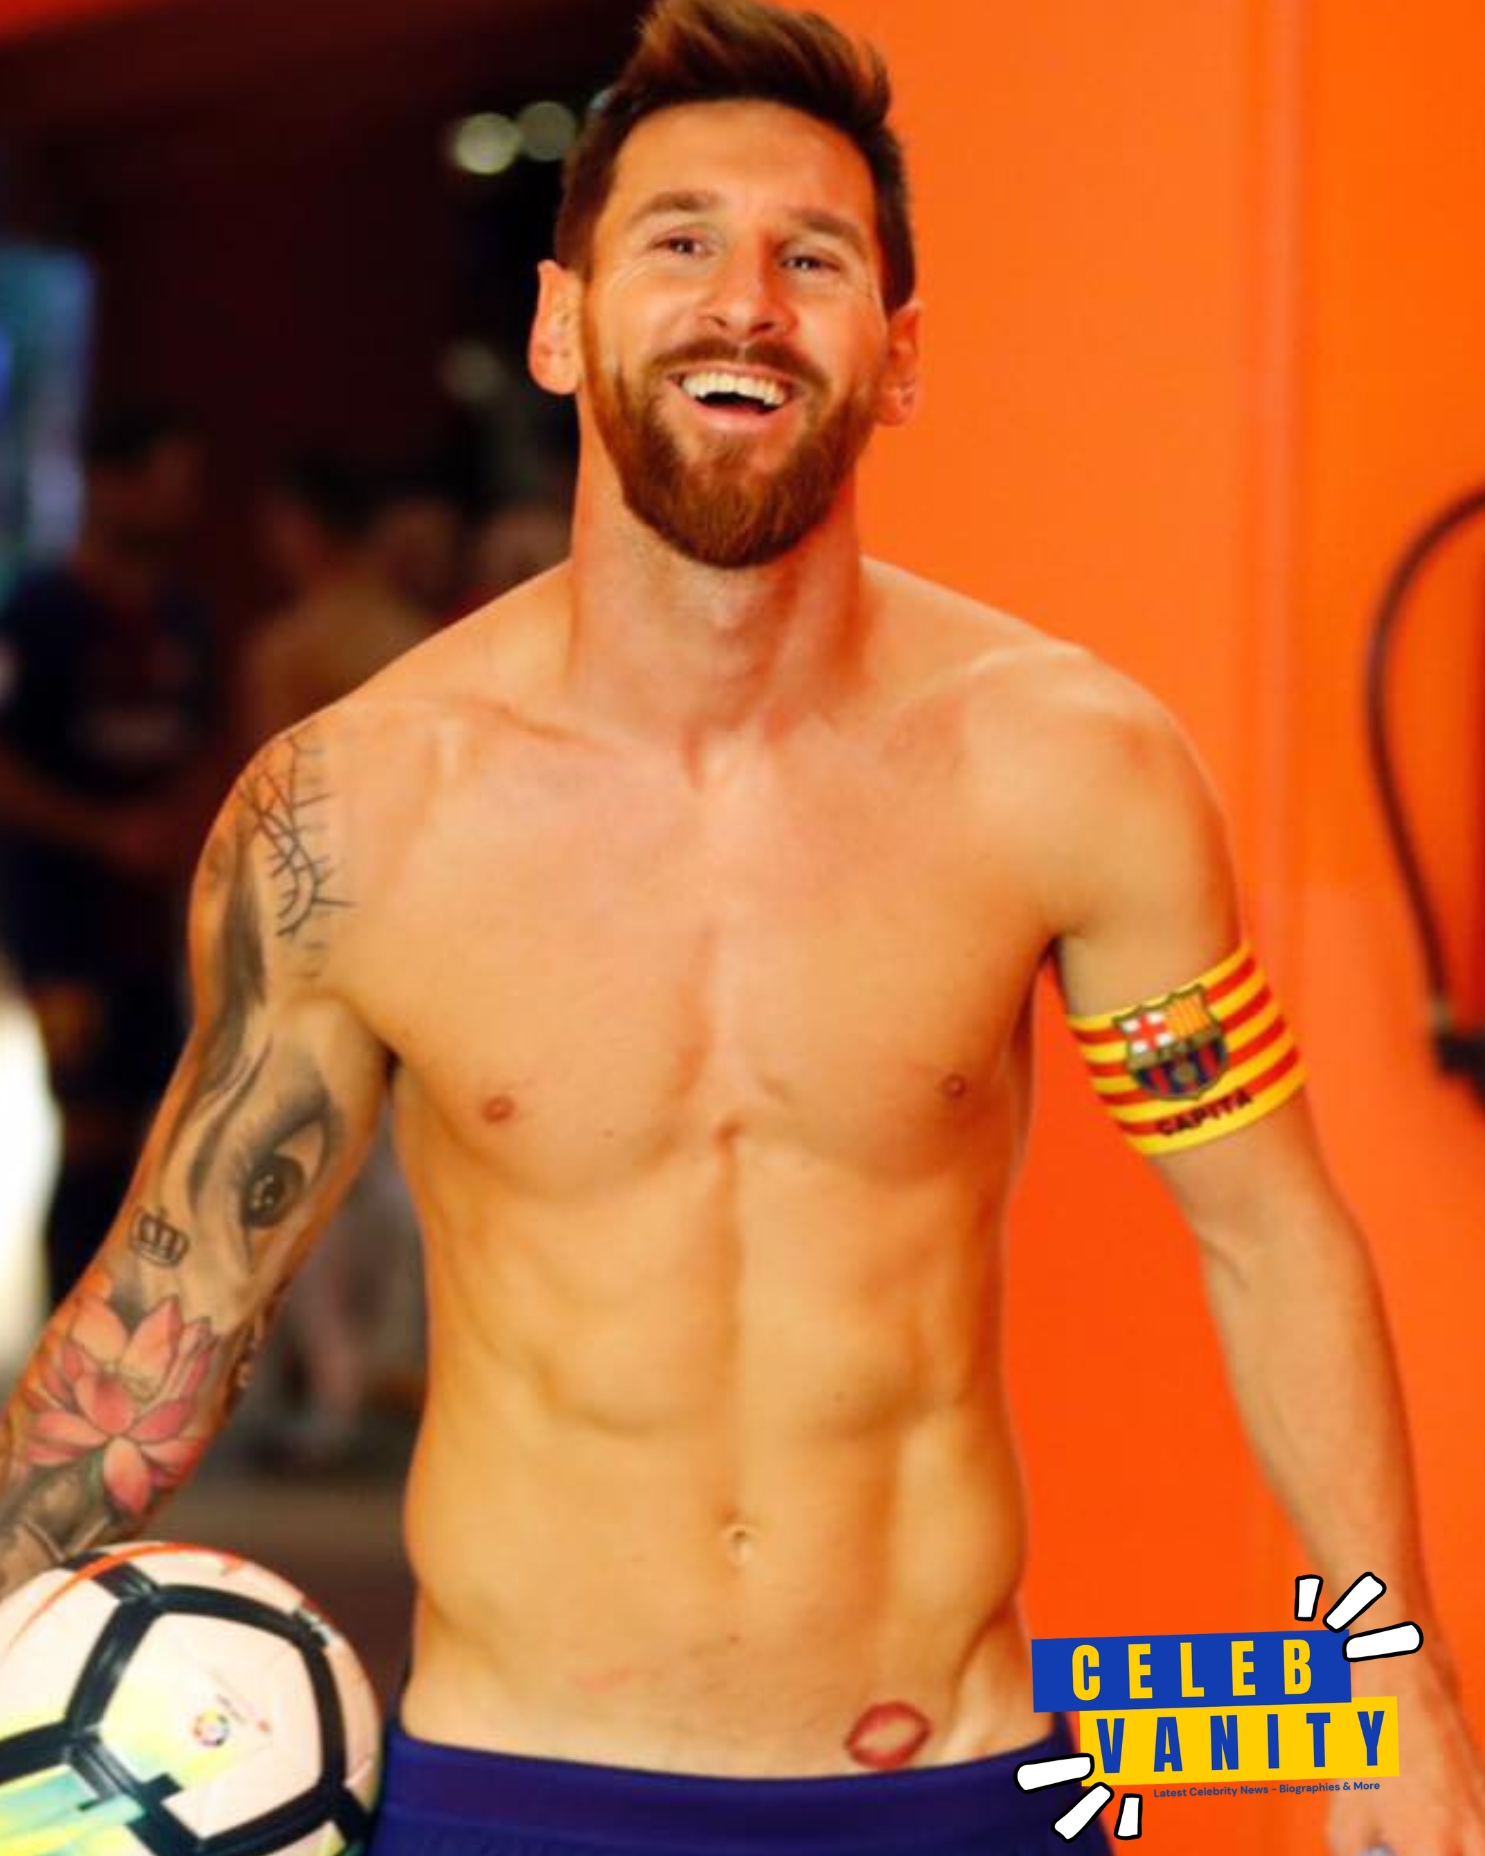 Lionel Messi - Wiki, Bio, Age, Height, Marital Status, Family, Career,  Girlfriends, Net Worth, Social Media, Contacts, Controversies, Facts, And  More - Celeb Vanity